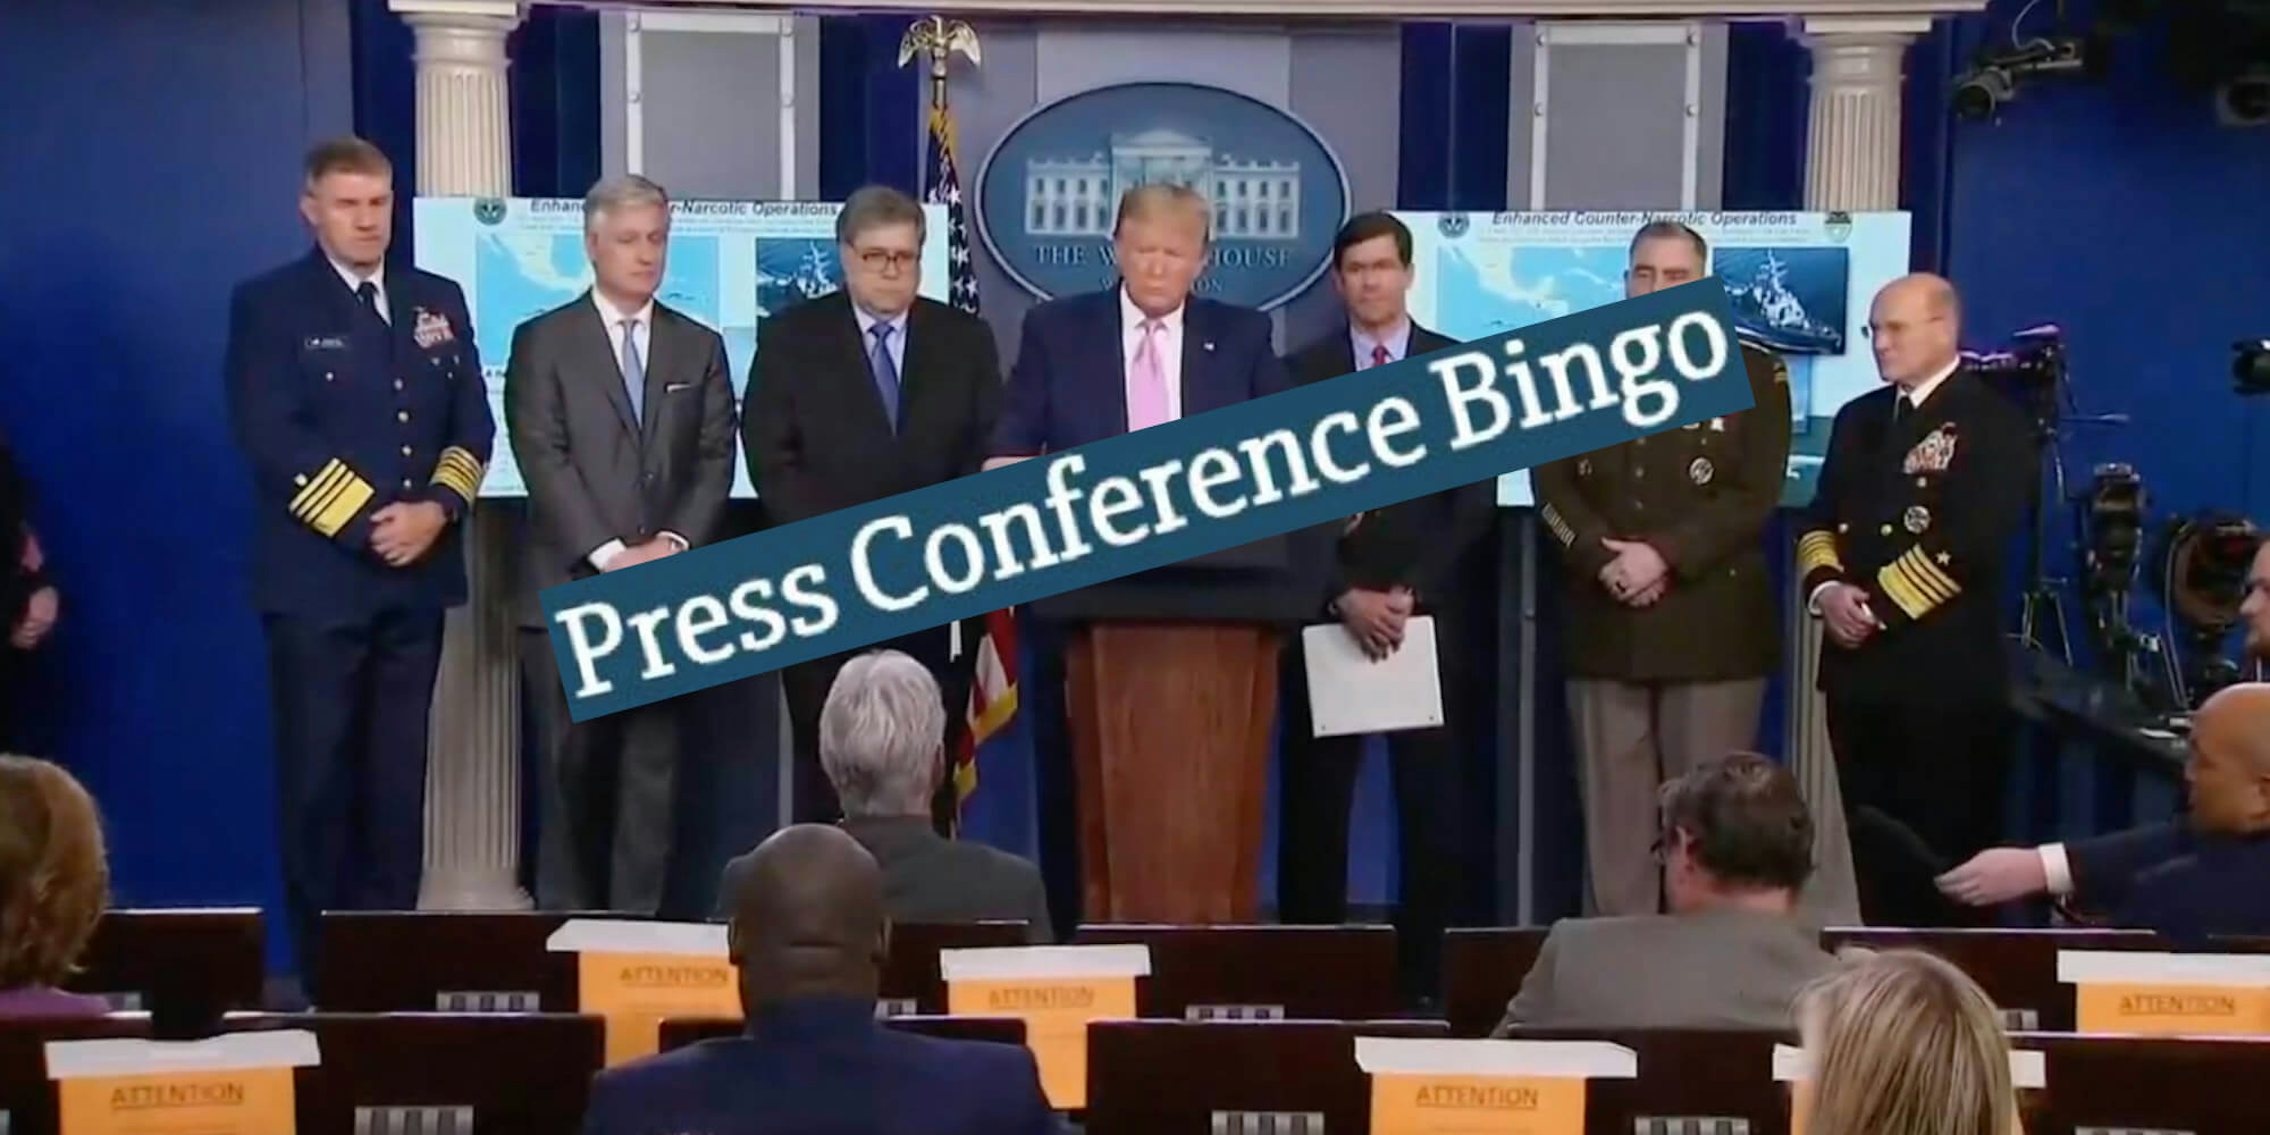 Press conference bingo on top of a White House press conference